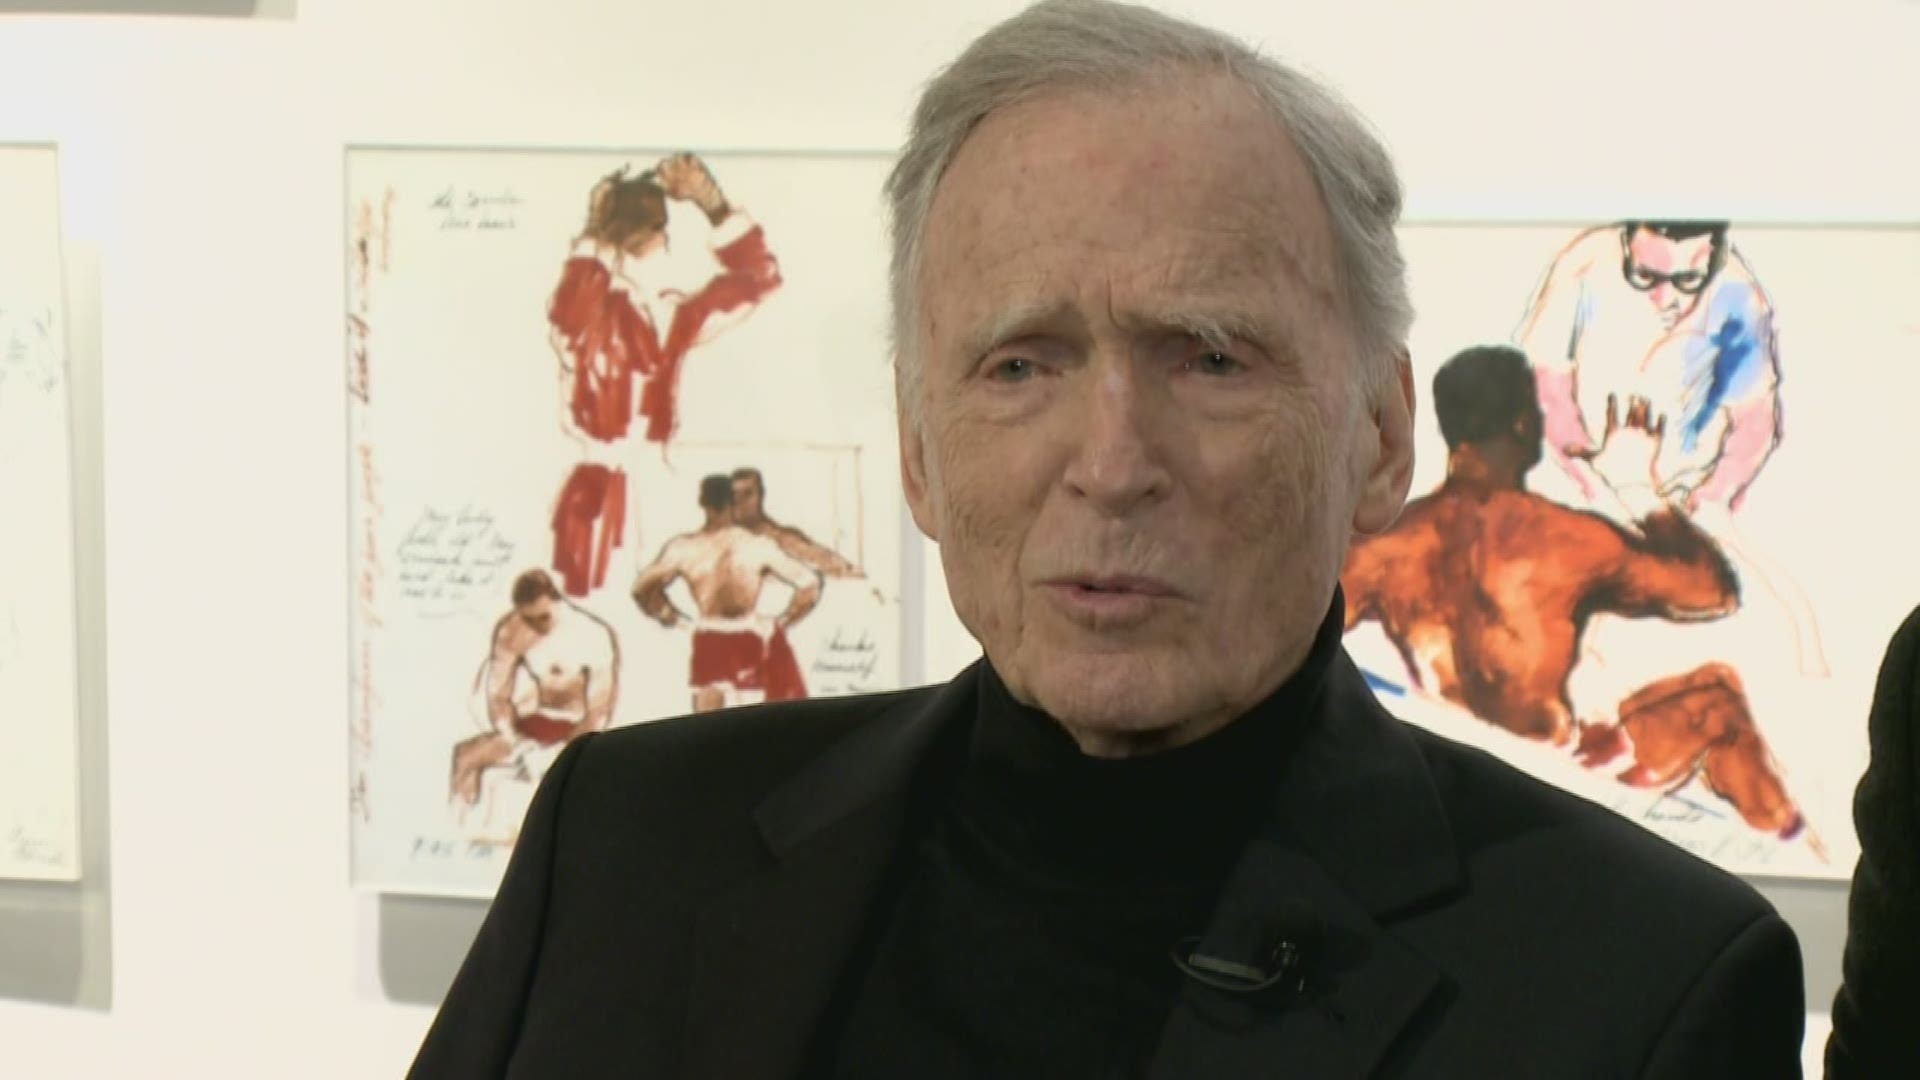 Dick Cavett talked about the upcoming documentary Ali & Cavett: The Tale of the Tapes that will air on HBO.